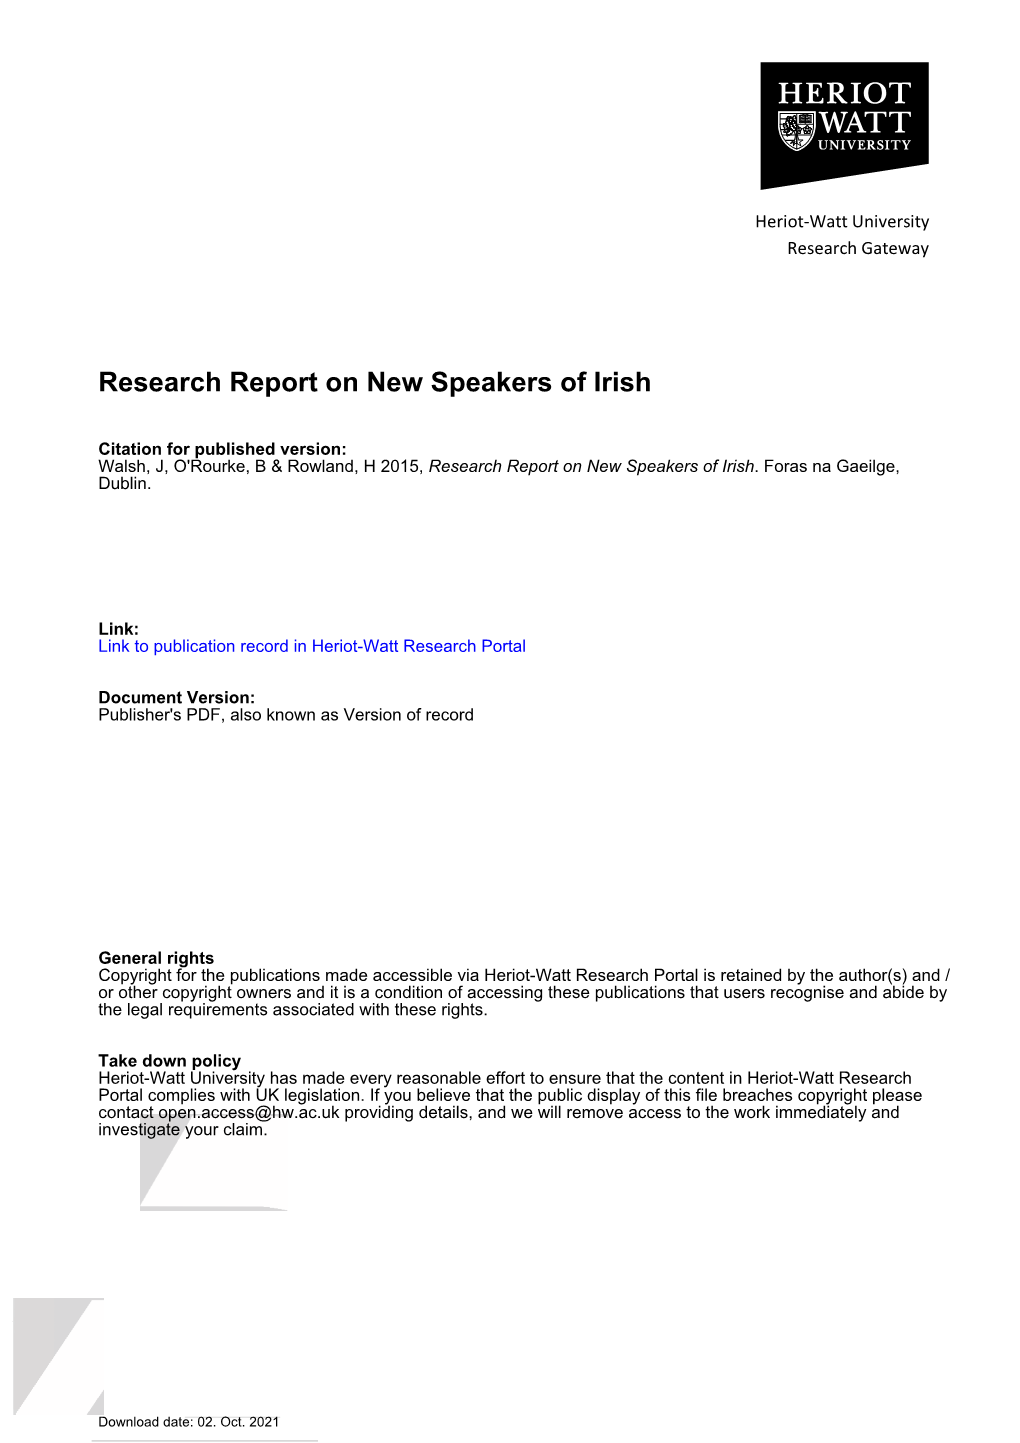 Research Report on New Speakers of Irish